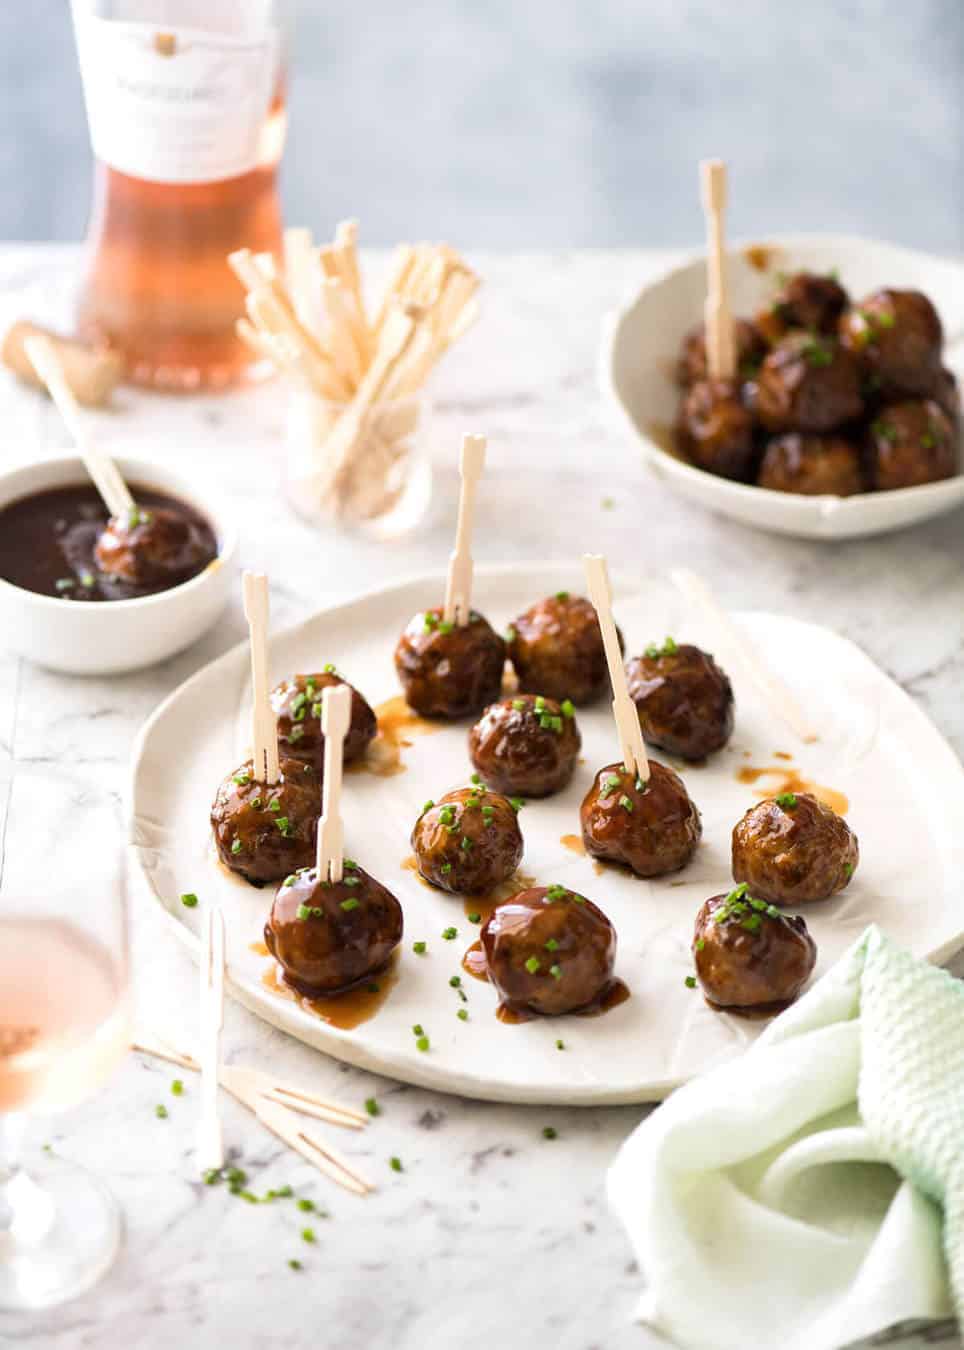 Plump, juicy and soft, these Party Cocktail Meatballs are baked and served with a fabulous Sweet & Sour Dipping Sauce that's super quick to make. Great make ahead for parties! www.recipetineats.com